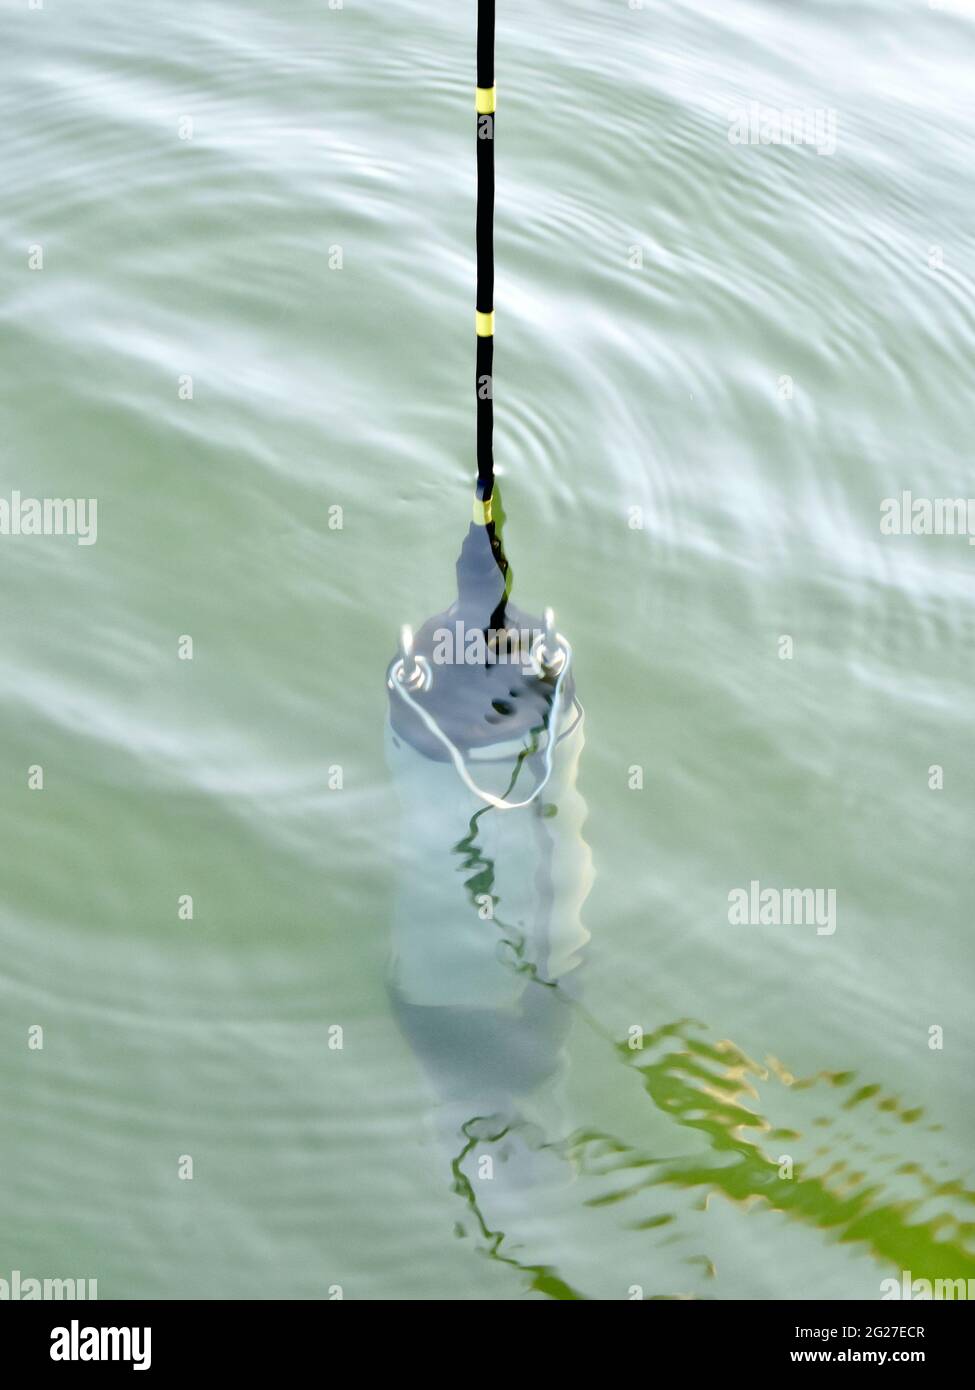 A water quality monitoring sonde is lowered into a water body to collect data on the physical characteristics of water chemistry. Stock Photo